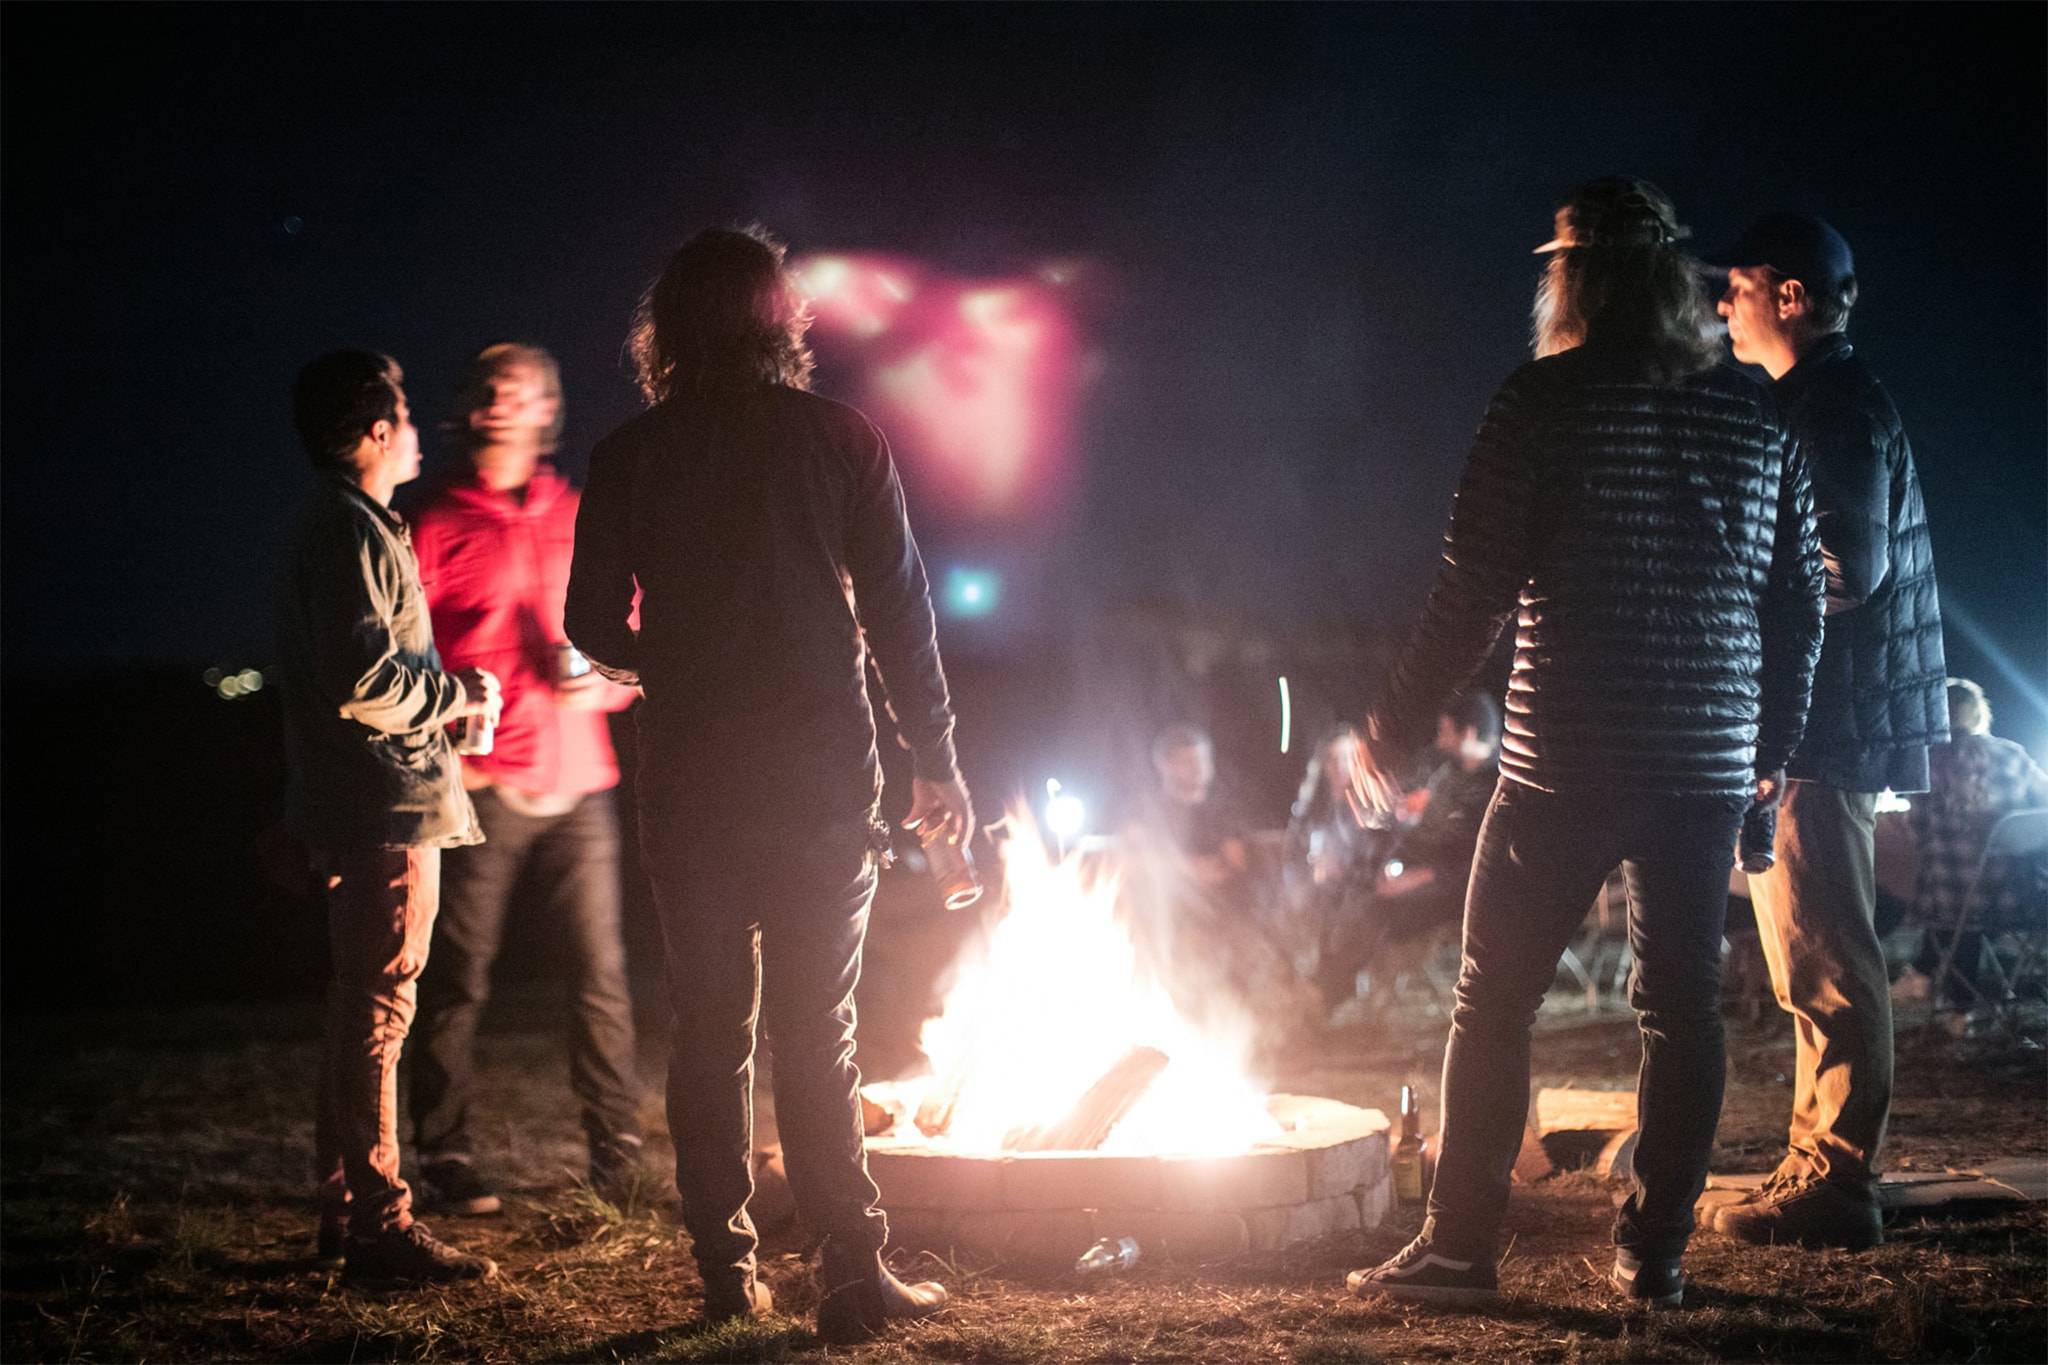 Five people standing around a campfire